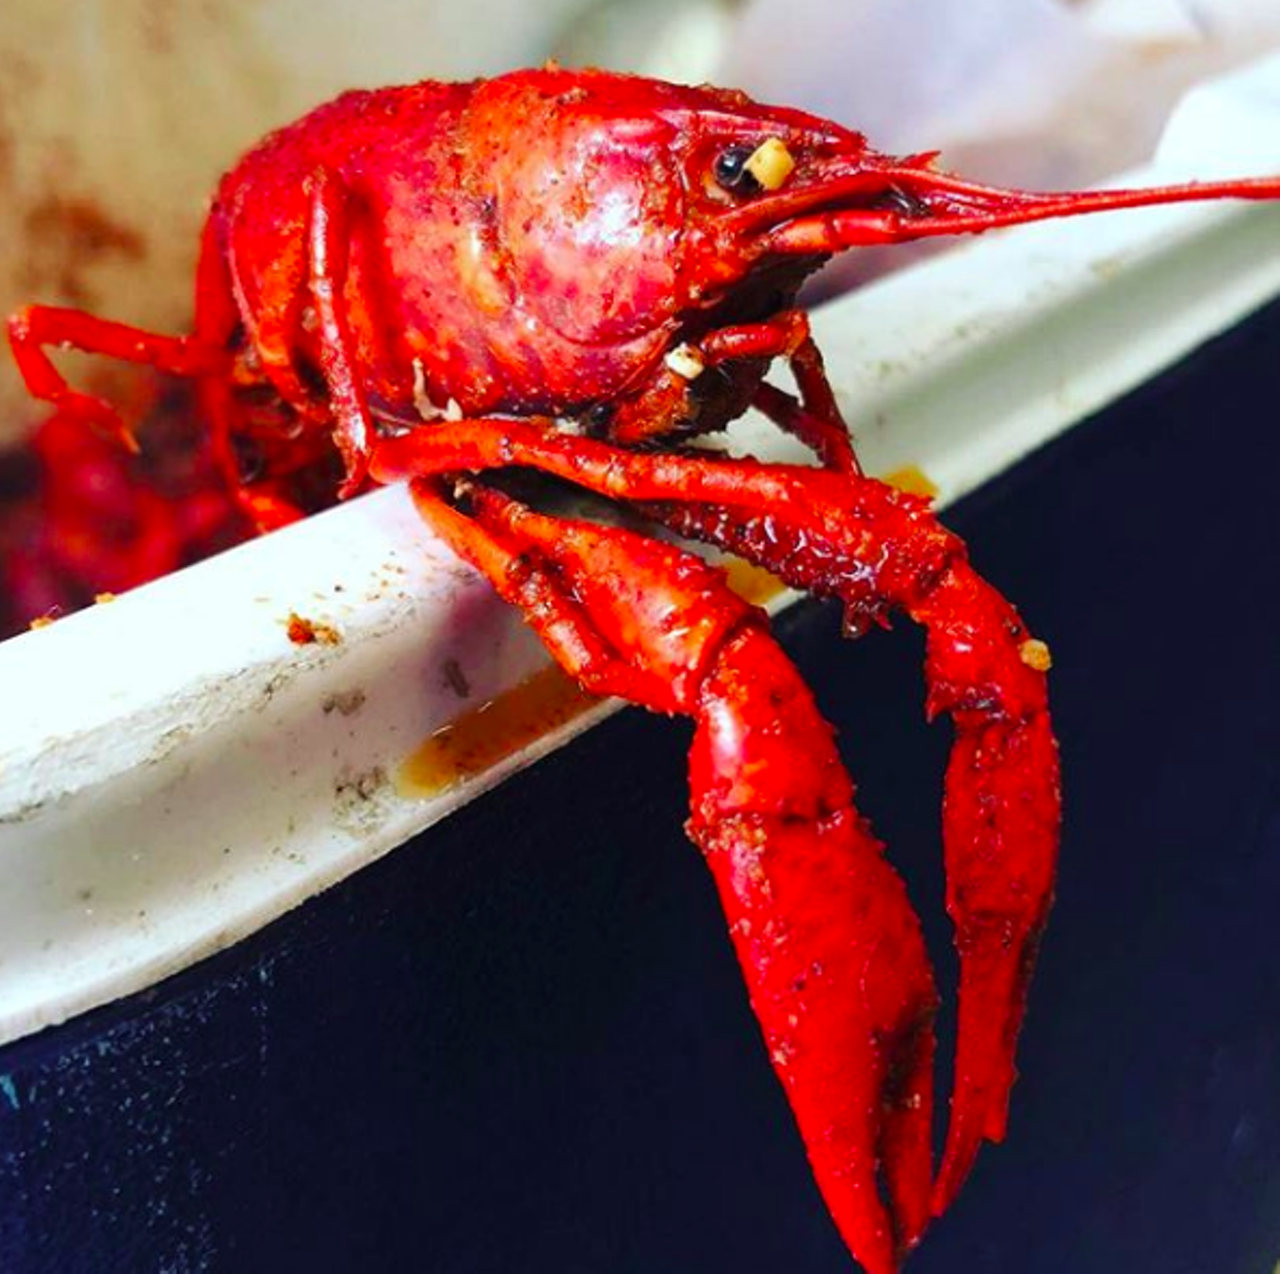 Groomer’s Seafood
9801 McCullough Ave, (210) 377-0951, groomerseafood.com
If you’re committed to having your own boil, head over to Groomer’s to get everything you need. This market is sure to have live, quality crawfish in stock when in season.
Photo via Instagram / groomerseafood